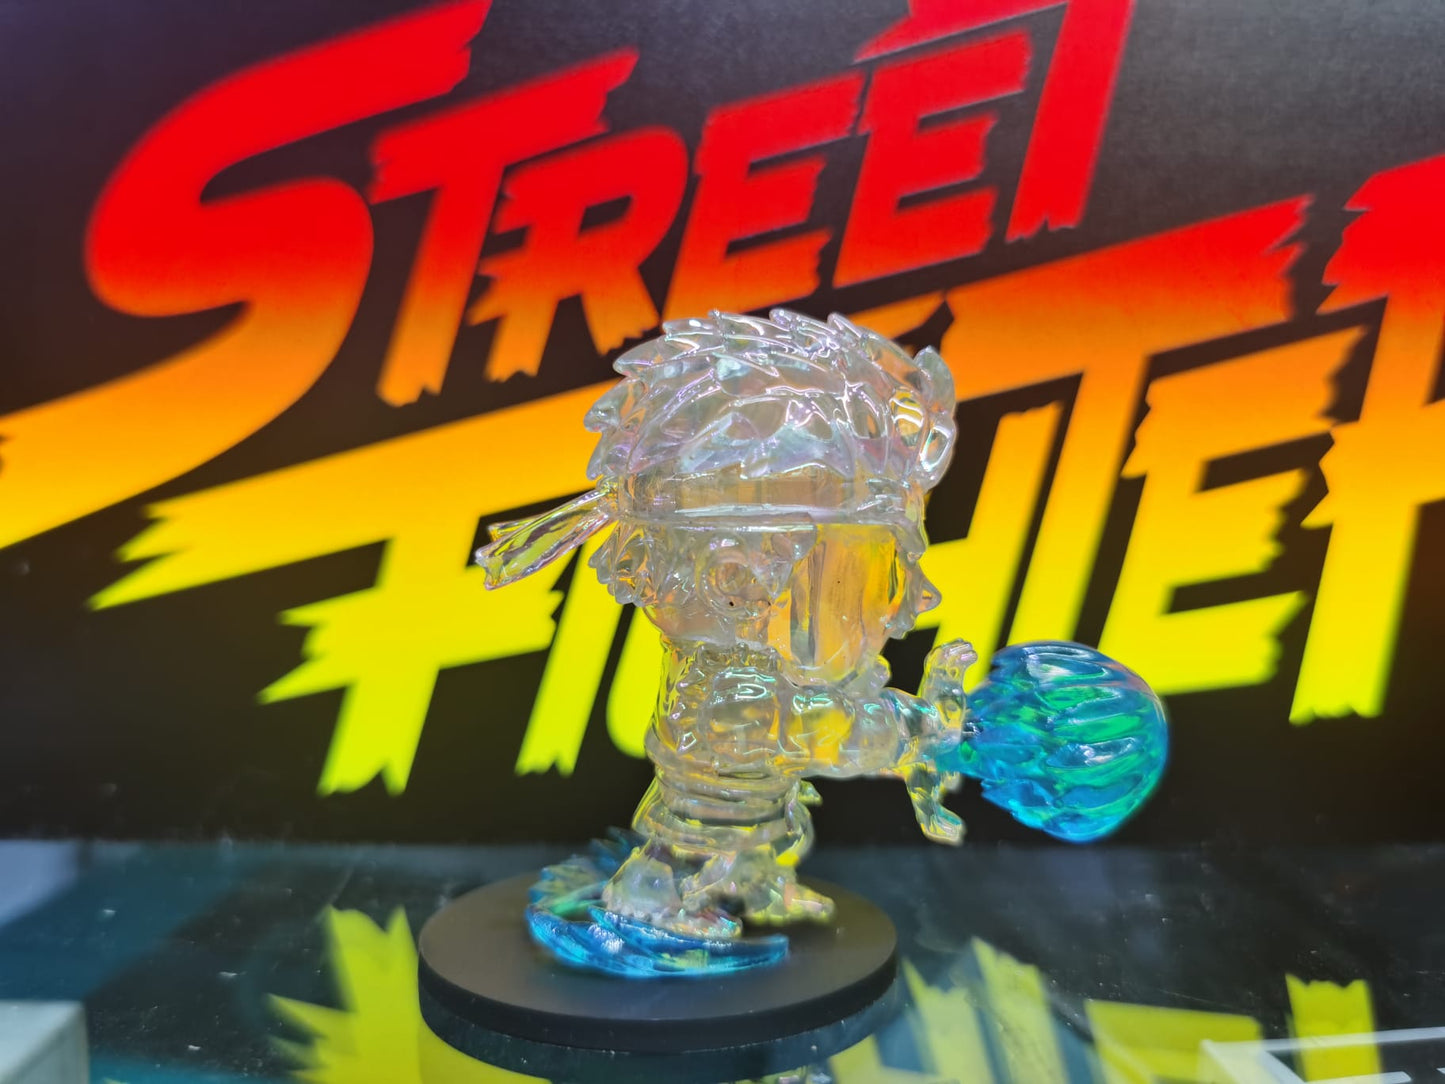 Mint Inbox 35th Anniversary Street Fighter Box Surprise Figure - Limited Edition Mystery Blind Box